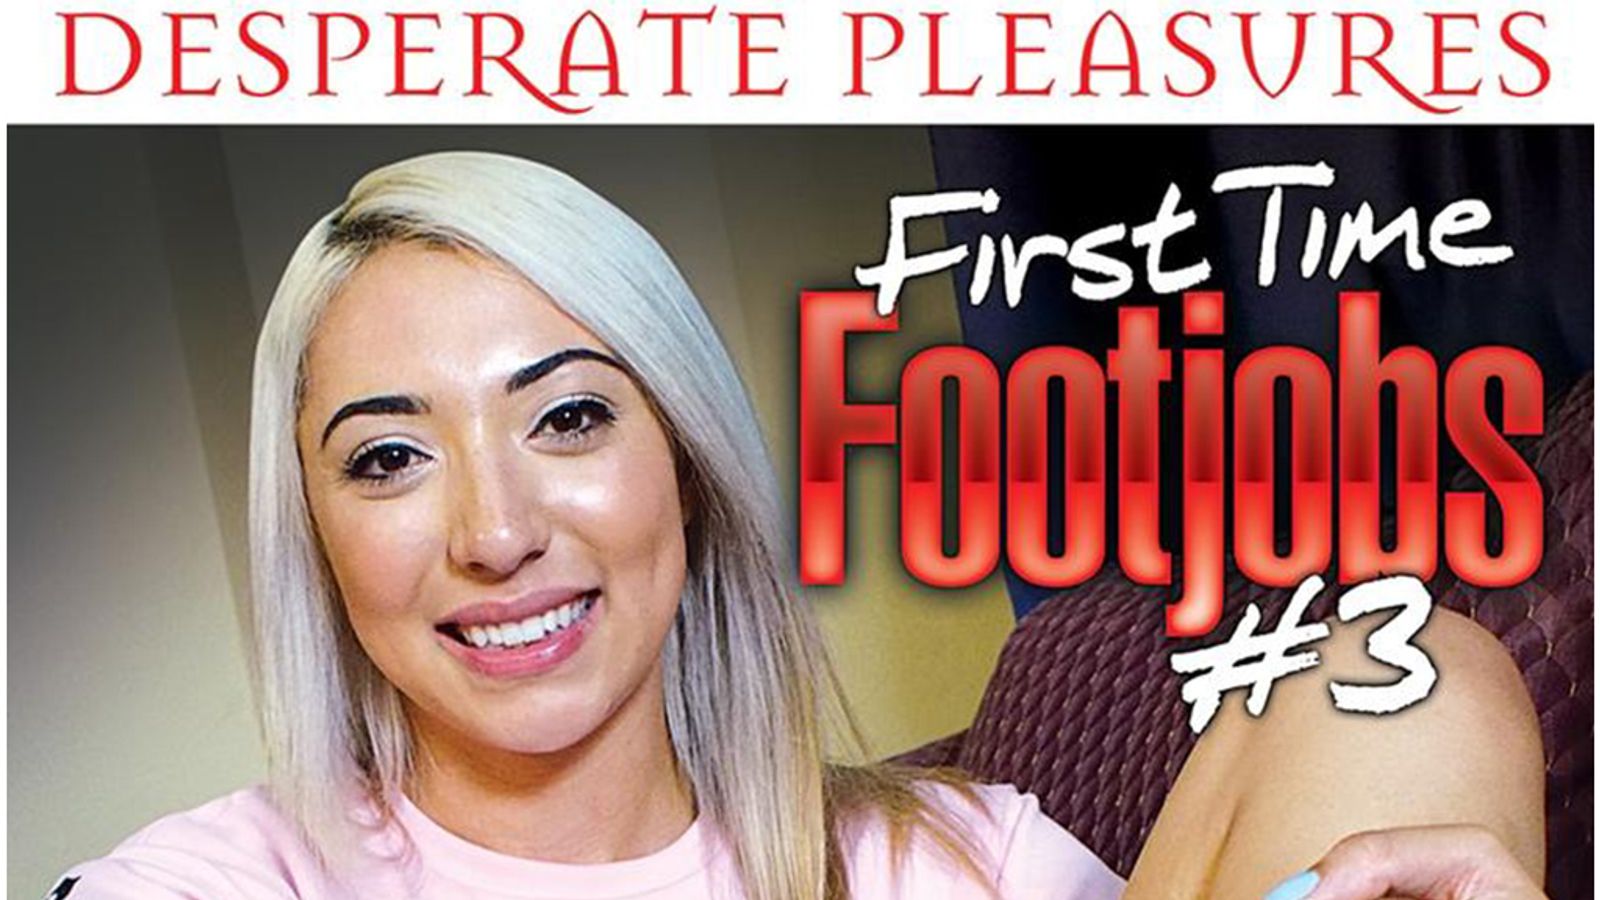 Desperate Pleasures Now Shipping ‘First Time Footjobs 3’